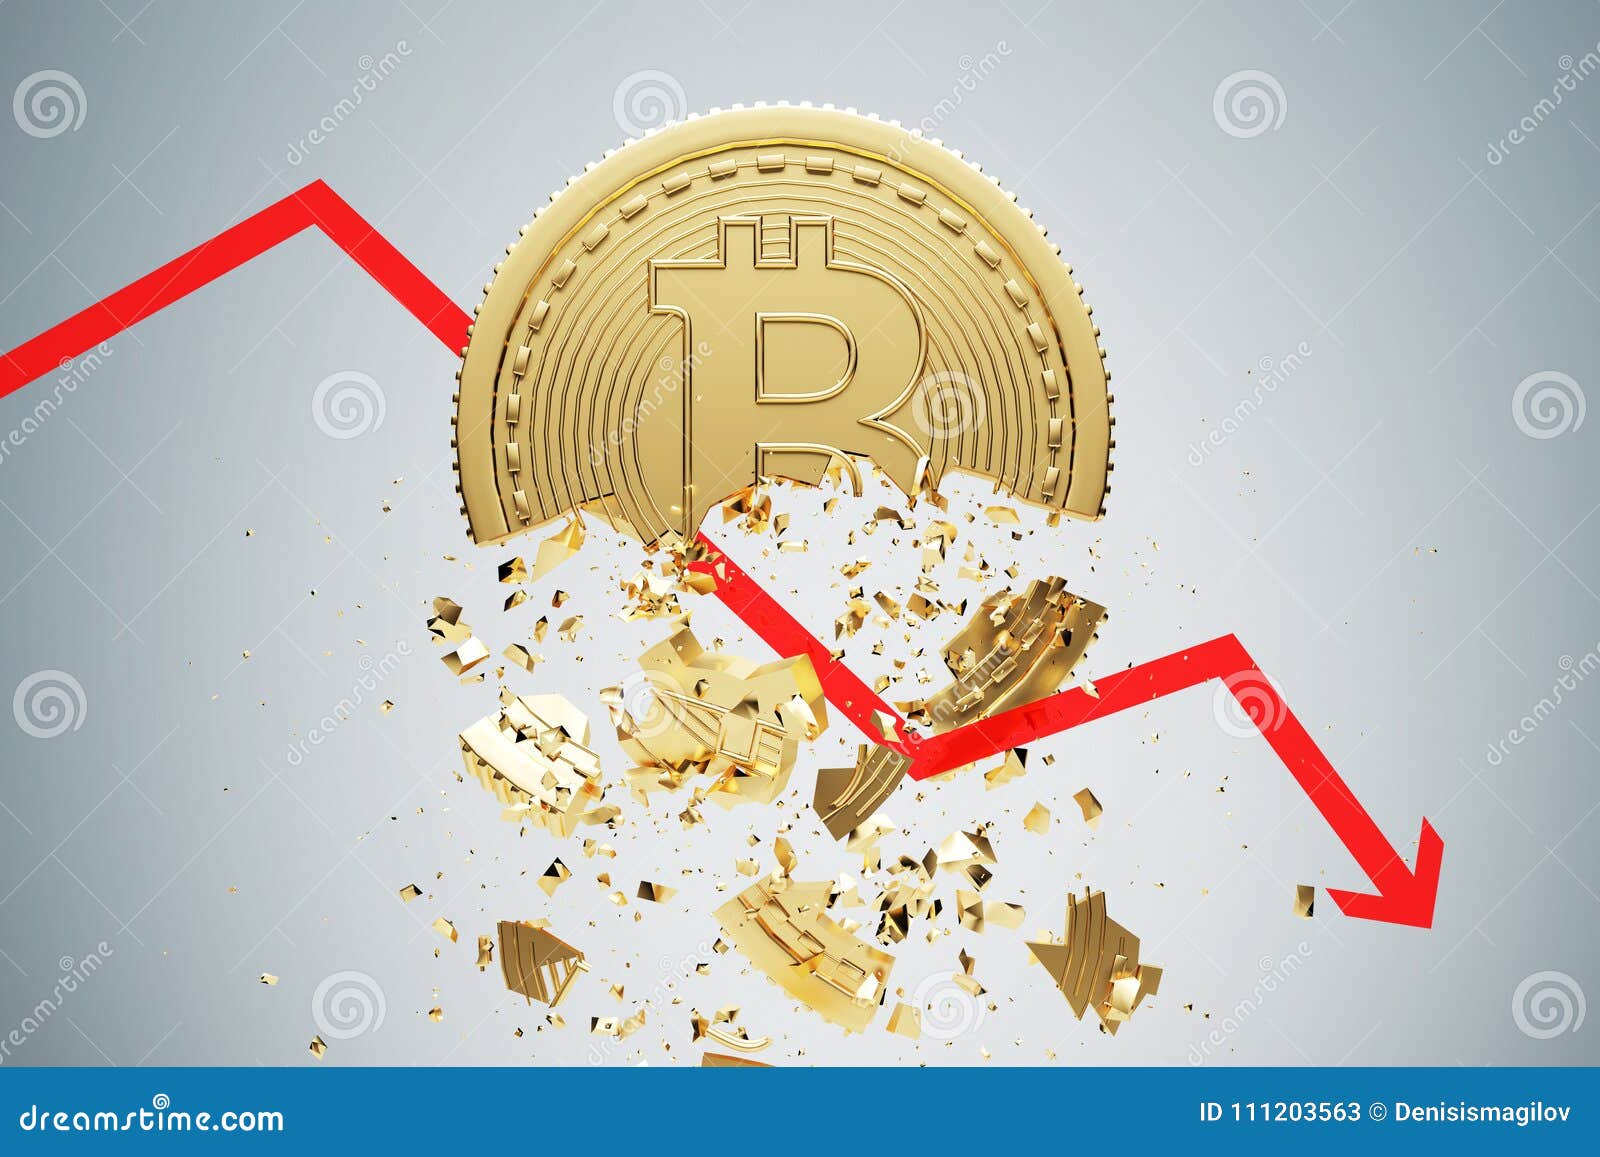 bitcoin collapsed